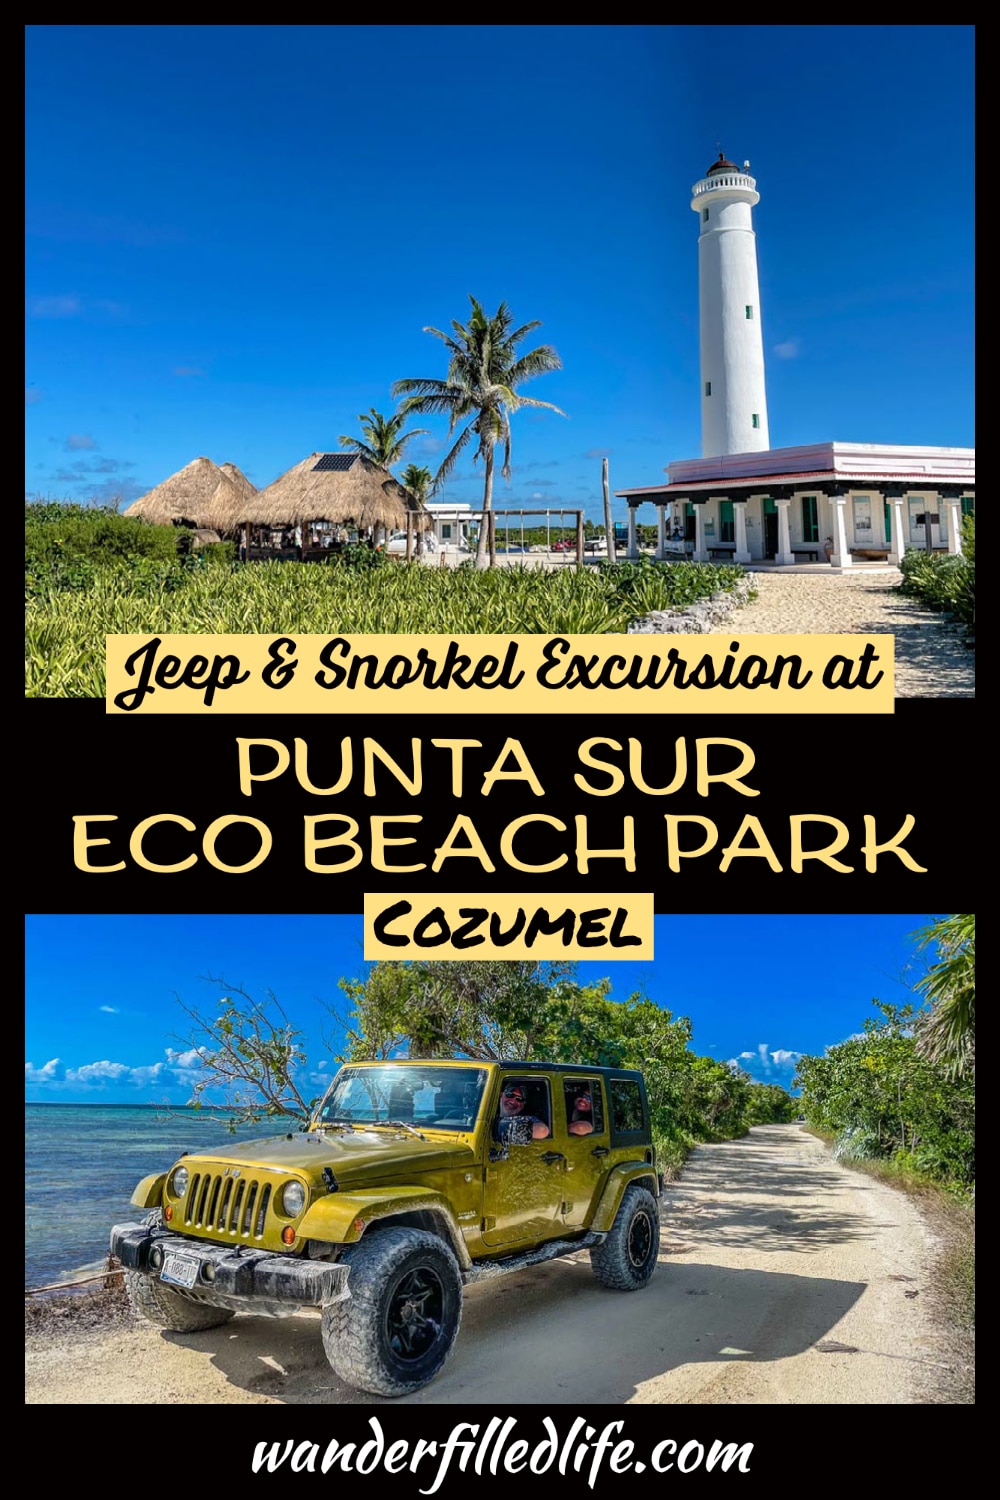 Our Jeep and snorkel tour exploring Cozumel's Punta Sur Eco Beach Park was the perfect balance of adventure and scenery.